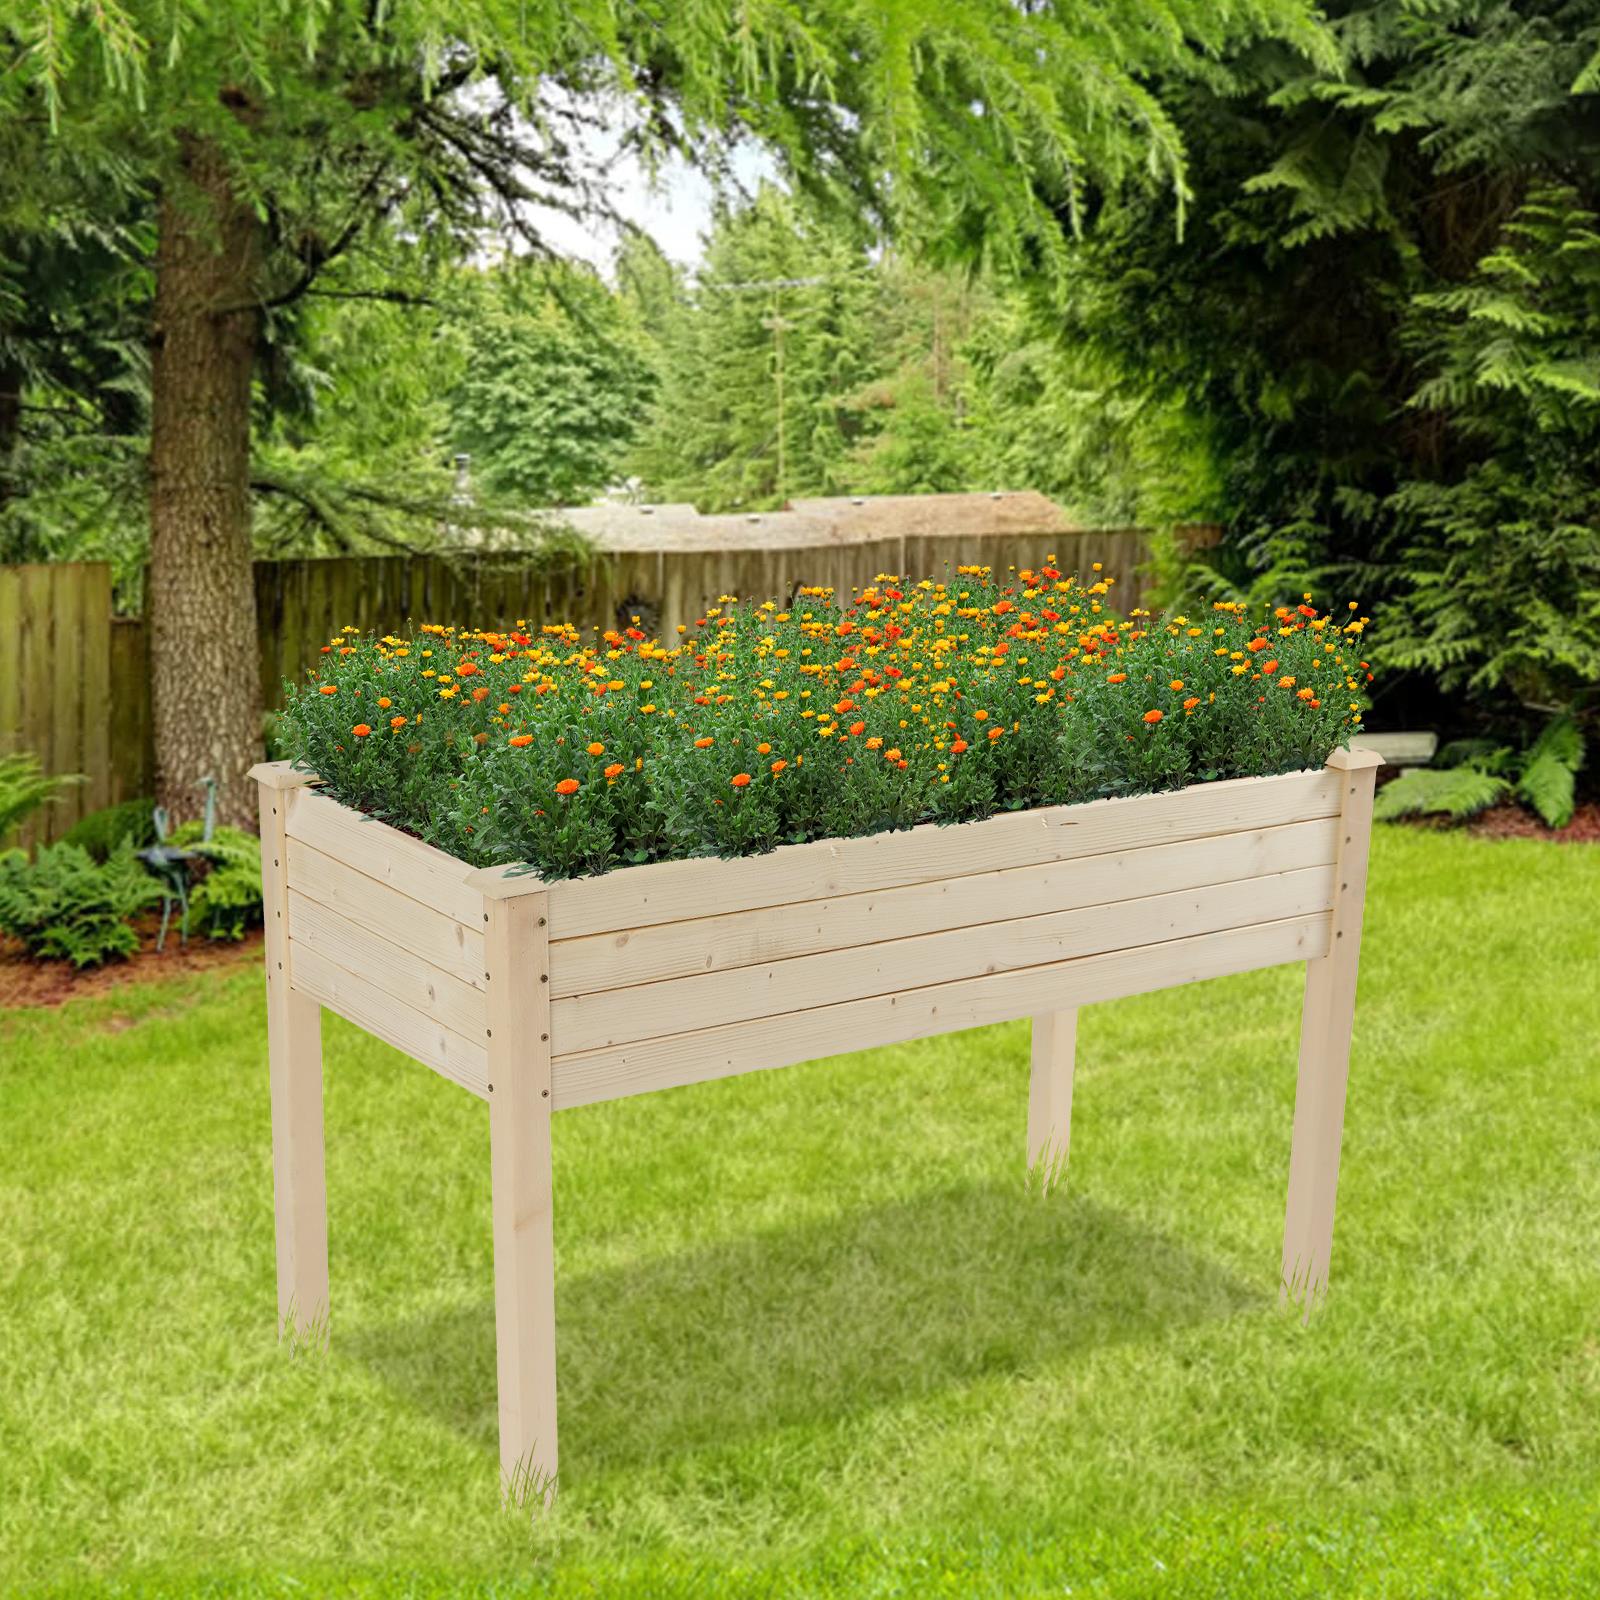 Zimtown 48.83 x 22.44 x 29.92" Outdoor Wooden Raised Garden Bed Planter Raised Bed for Vegetables, Grass, Lawn, Yard - Natural - image 3 of 13